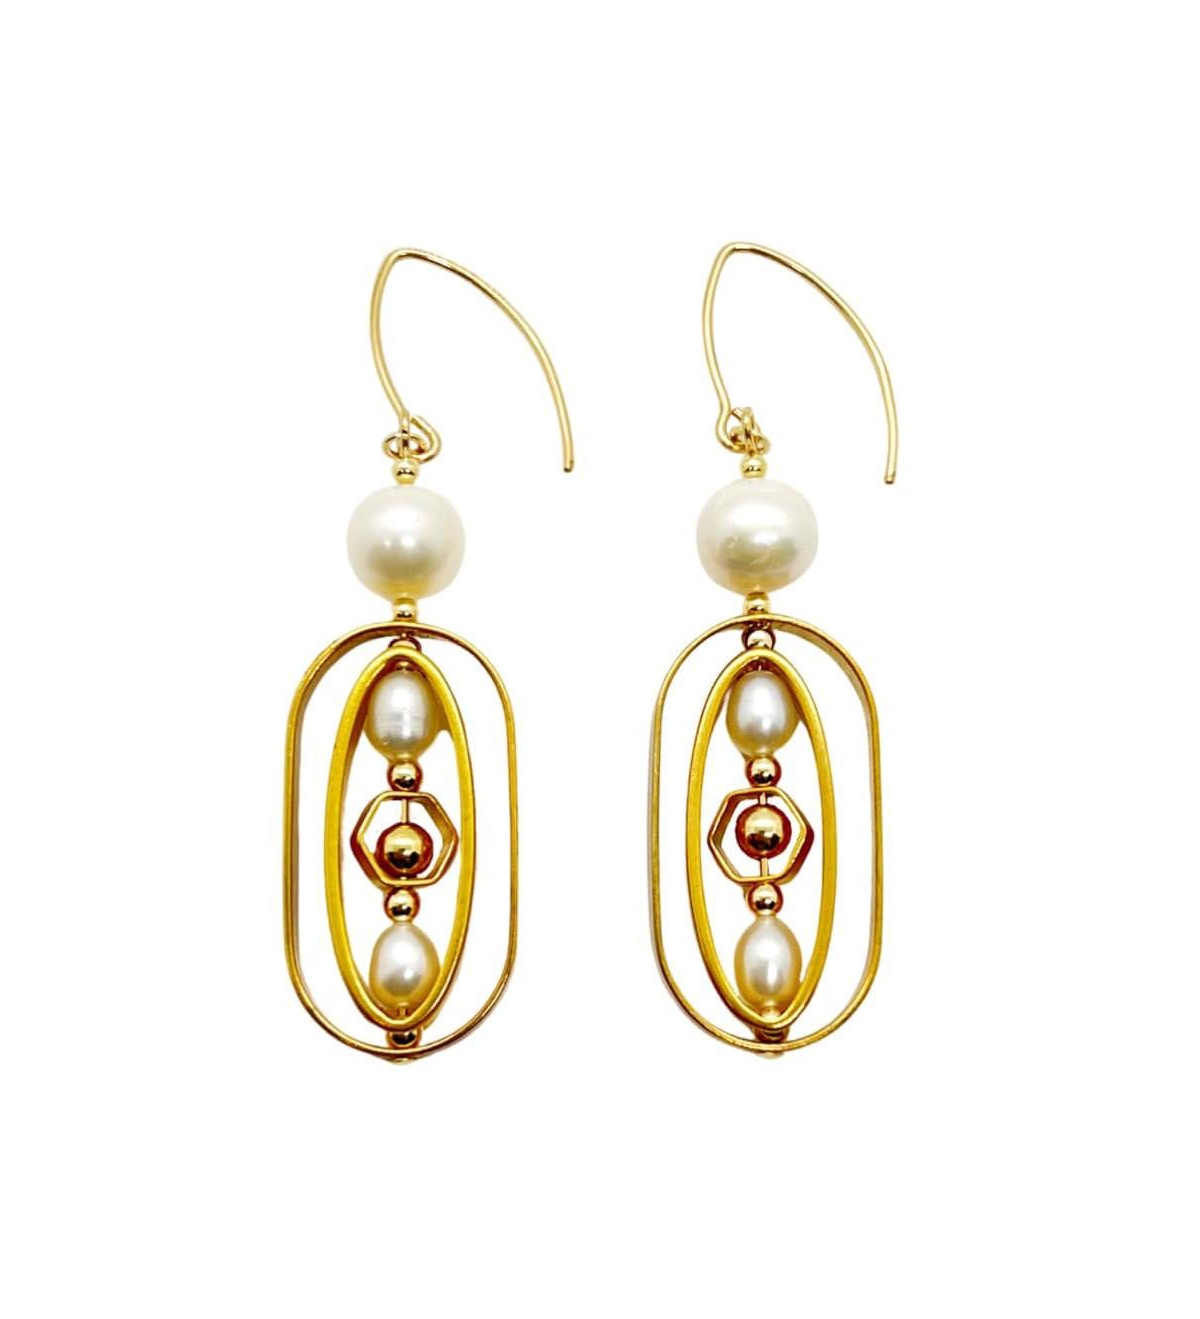 Pearls Geometric Earrings - White and gold